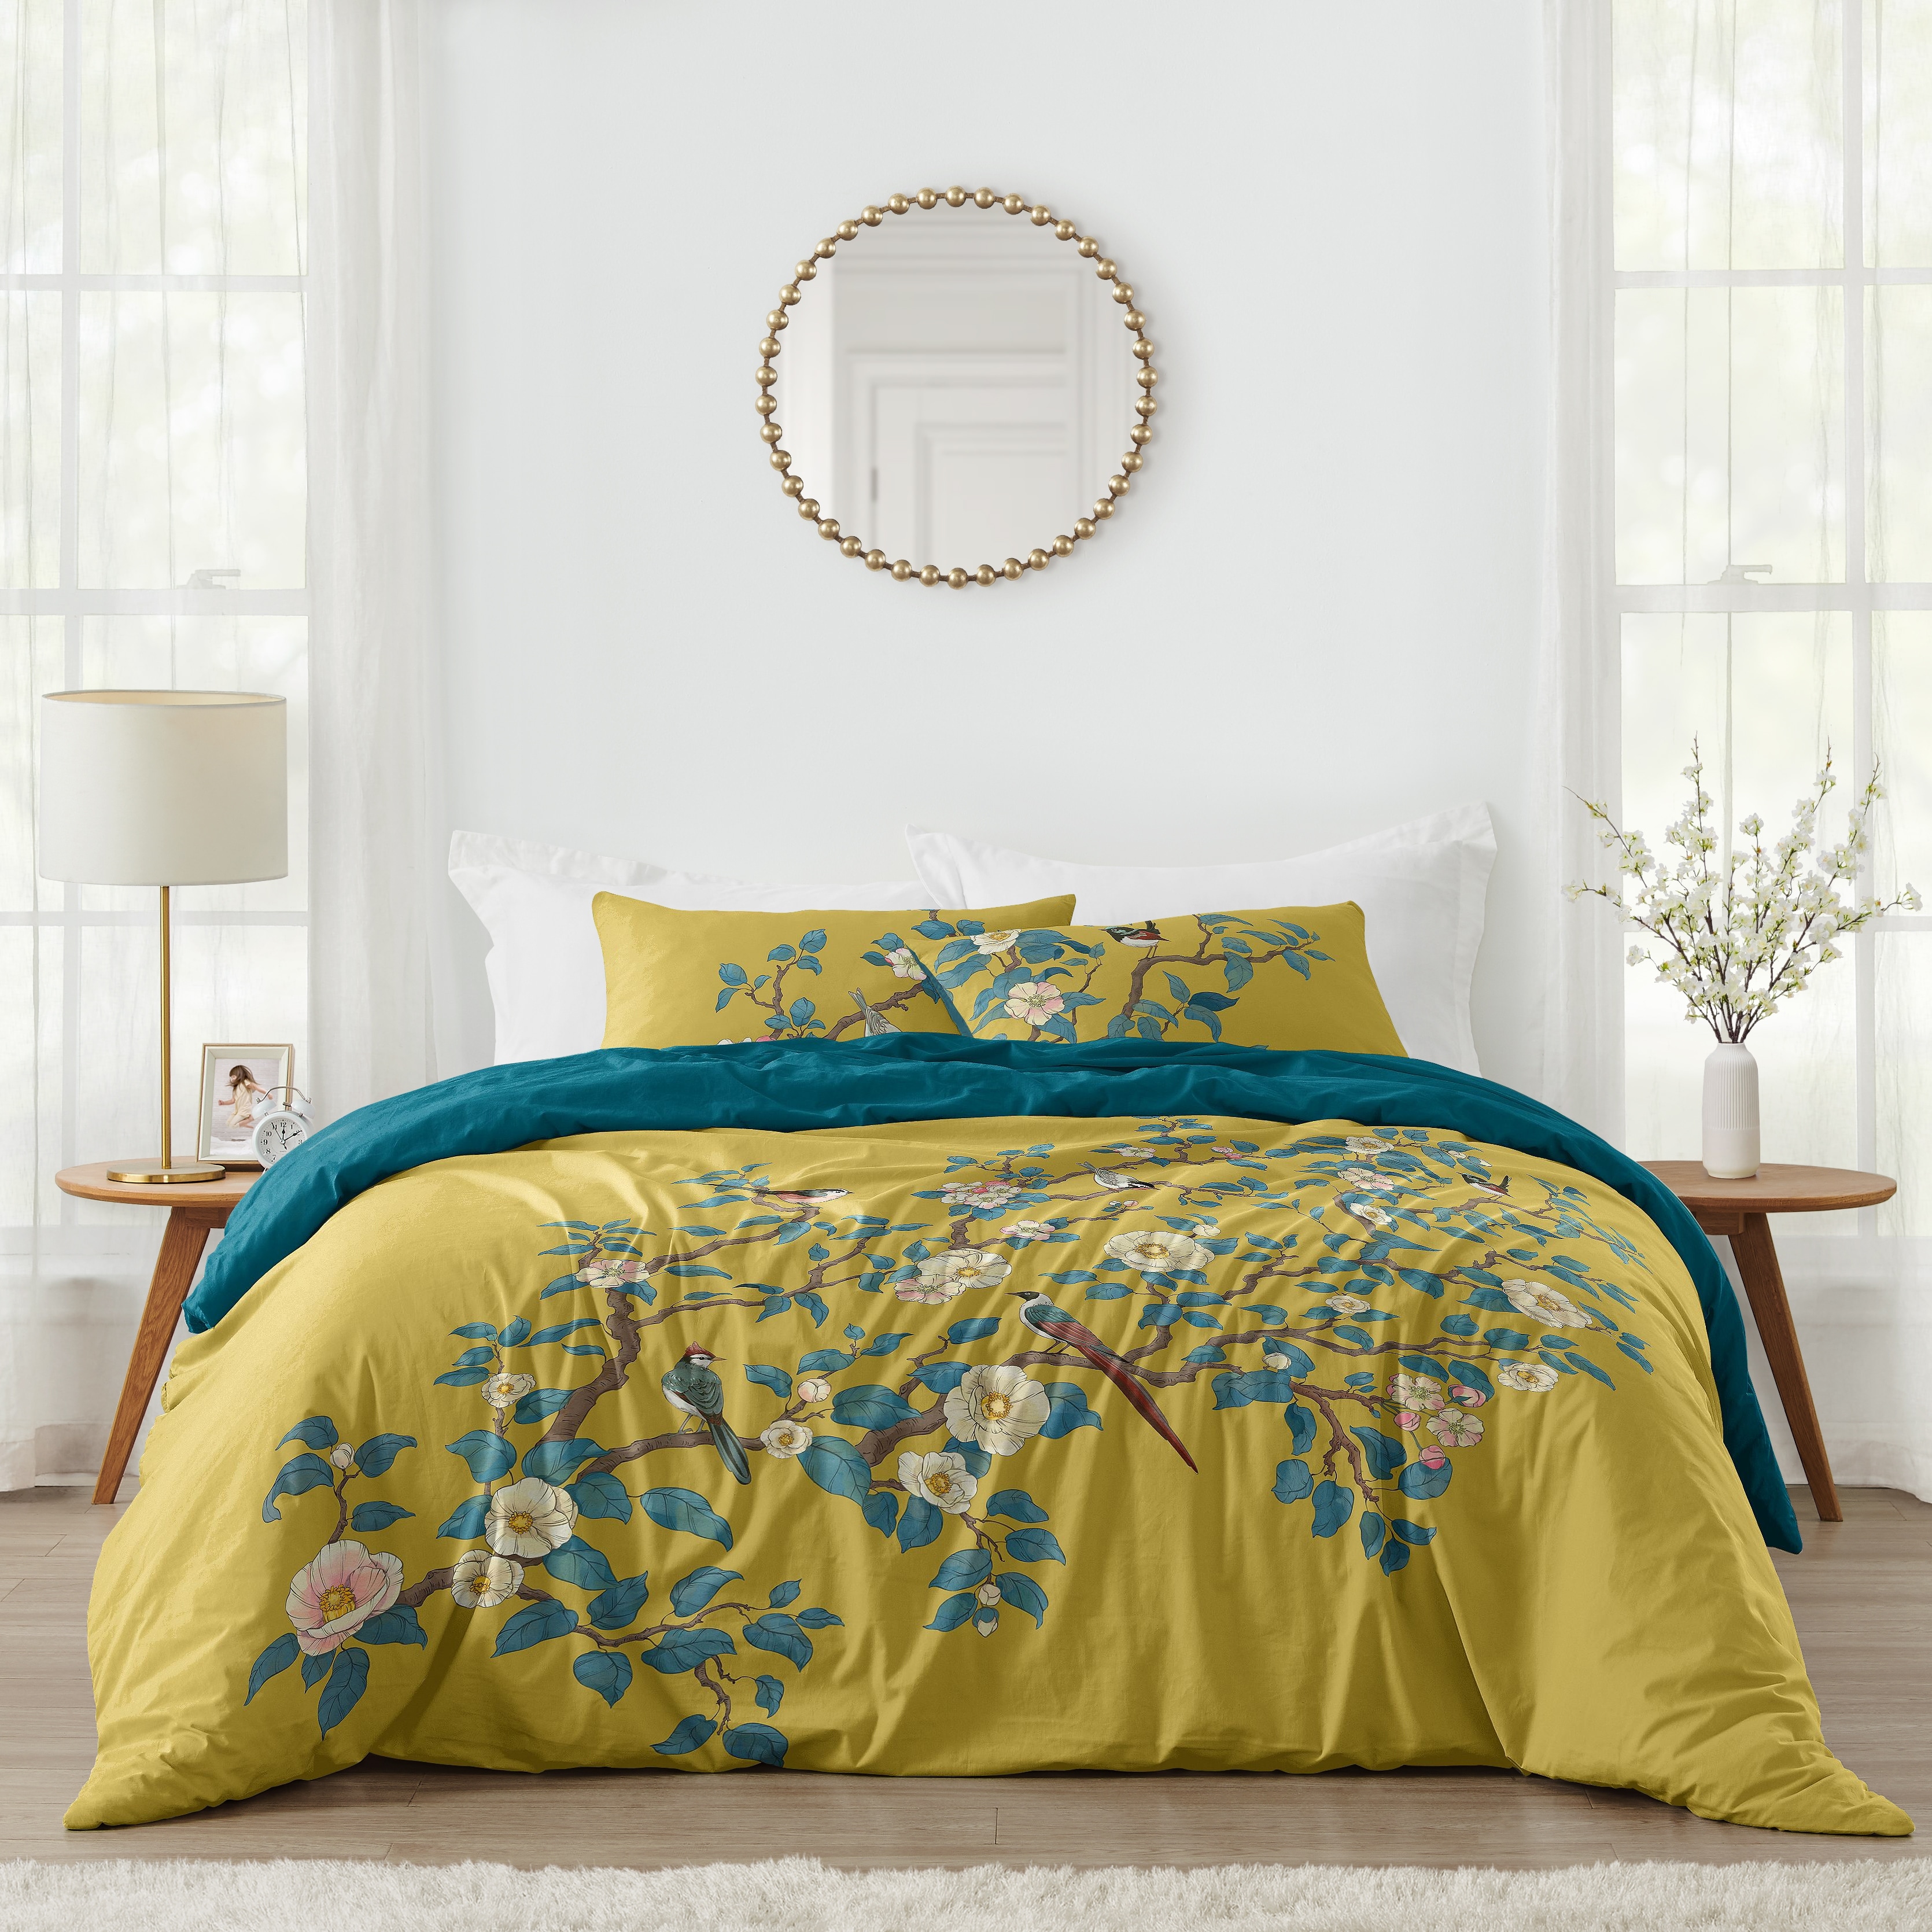 Yellow Floral Duvet Covers and Sets - Bed Bath & Beyond